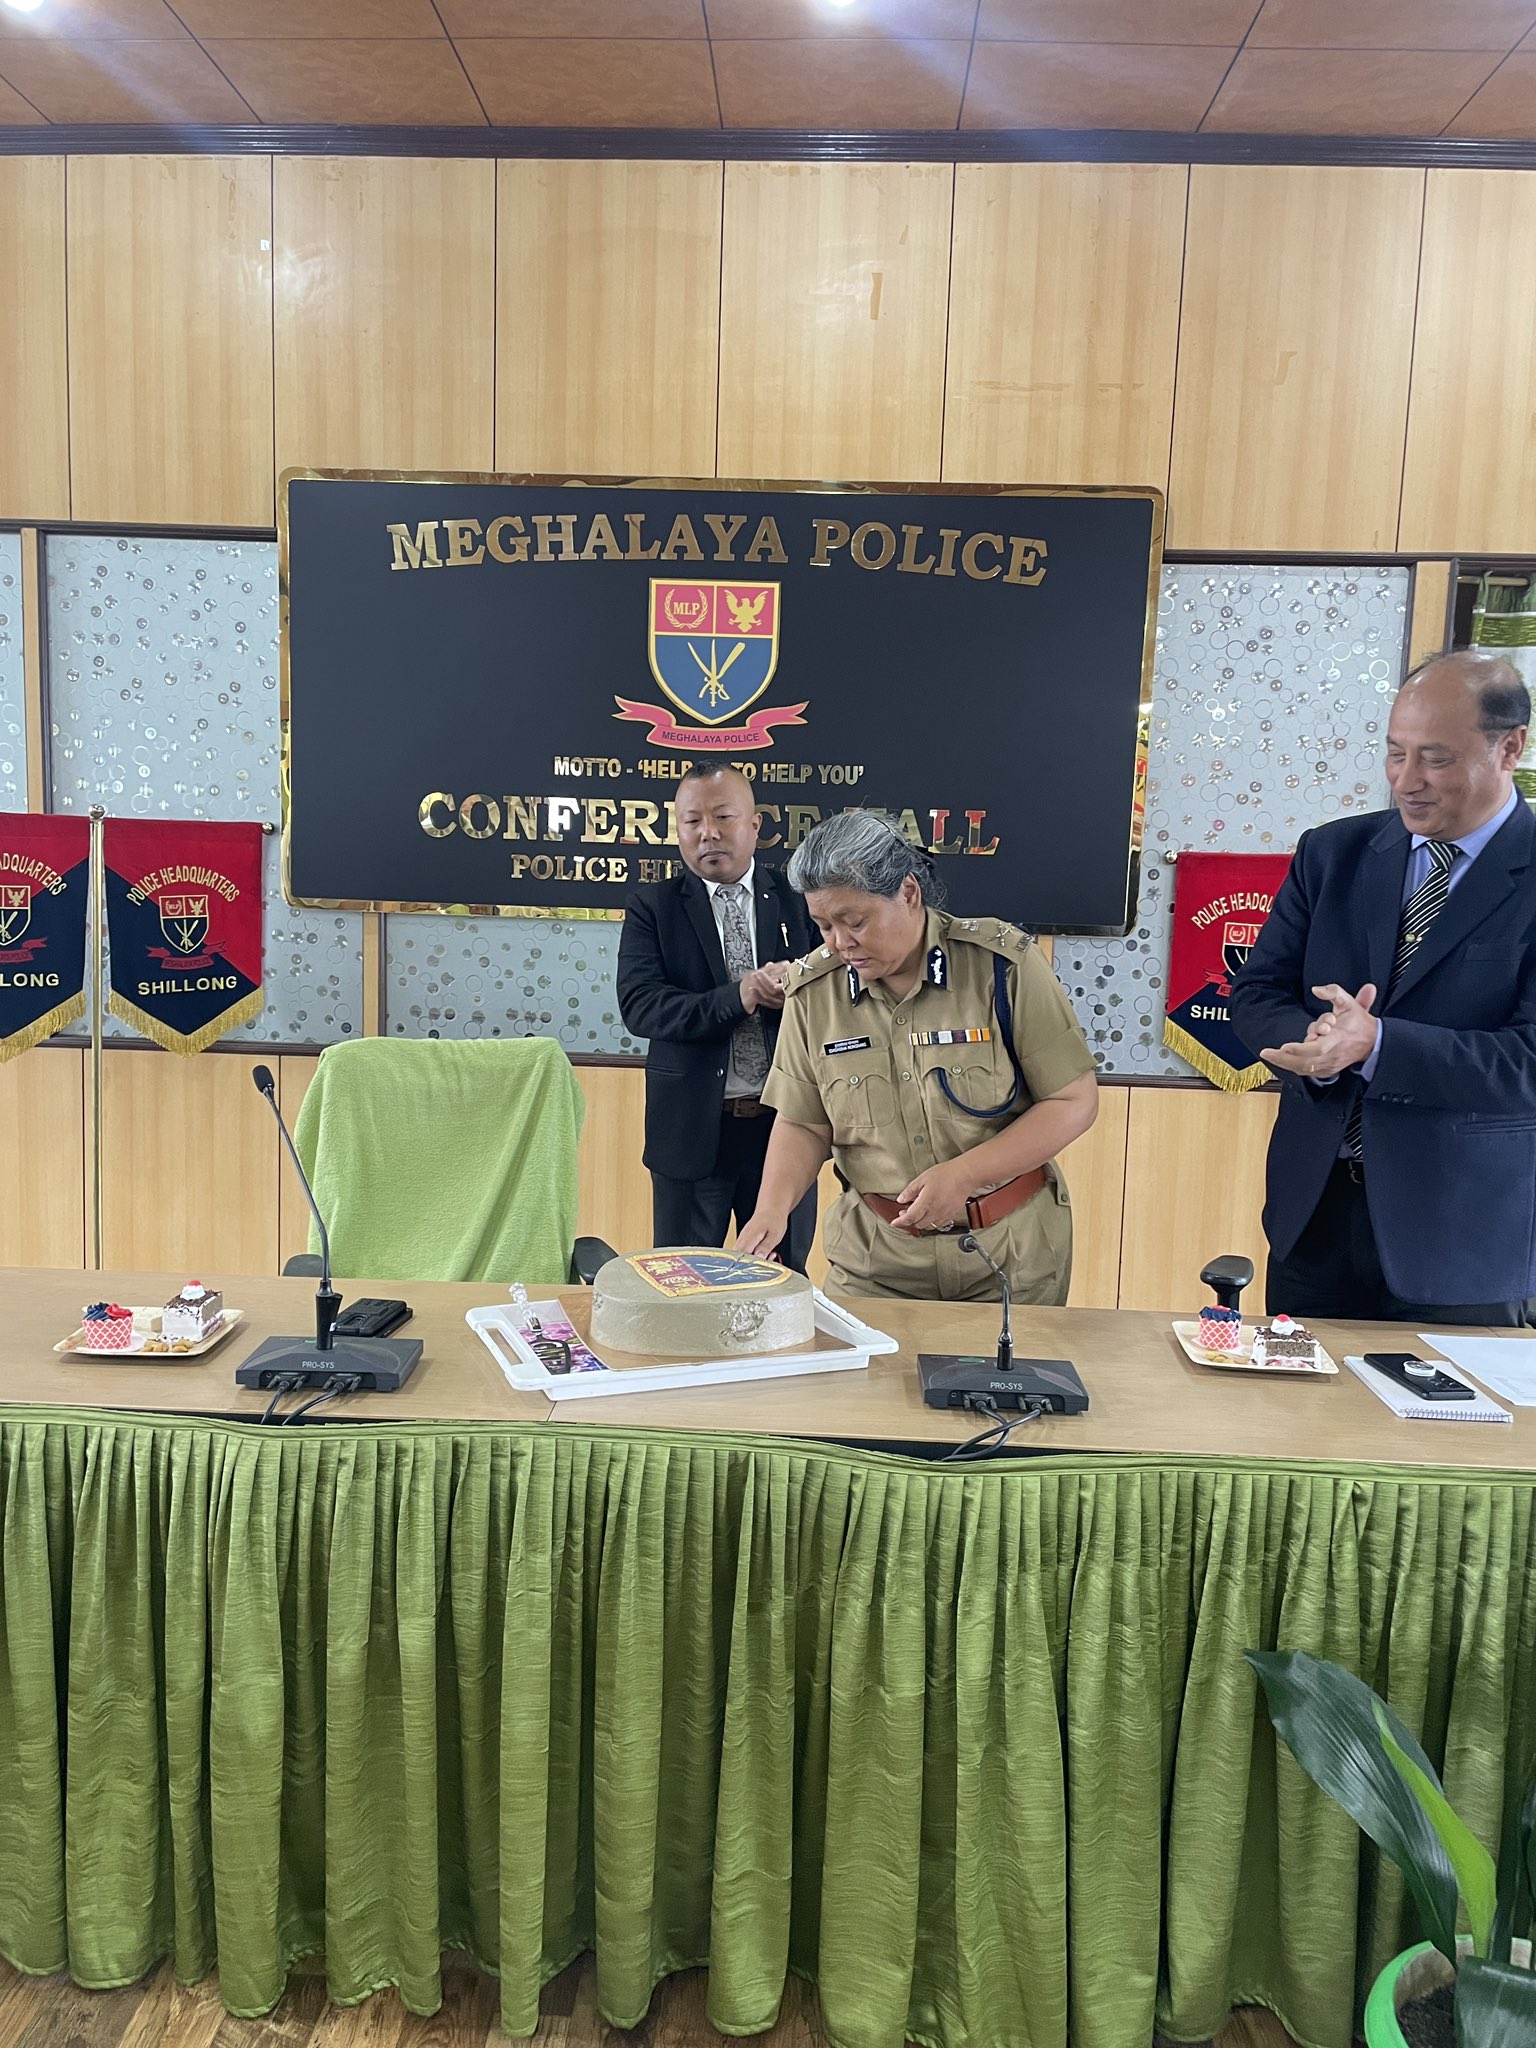 DGP to connect with public every Thursday